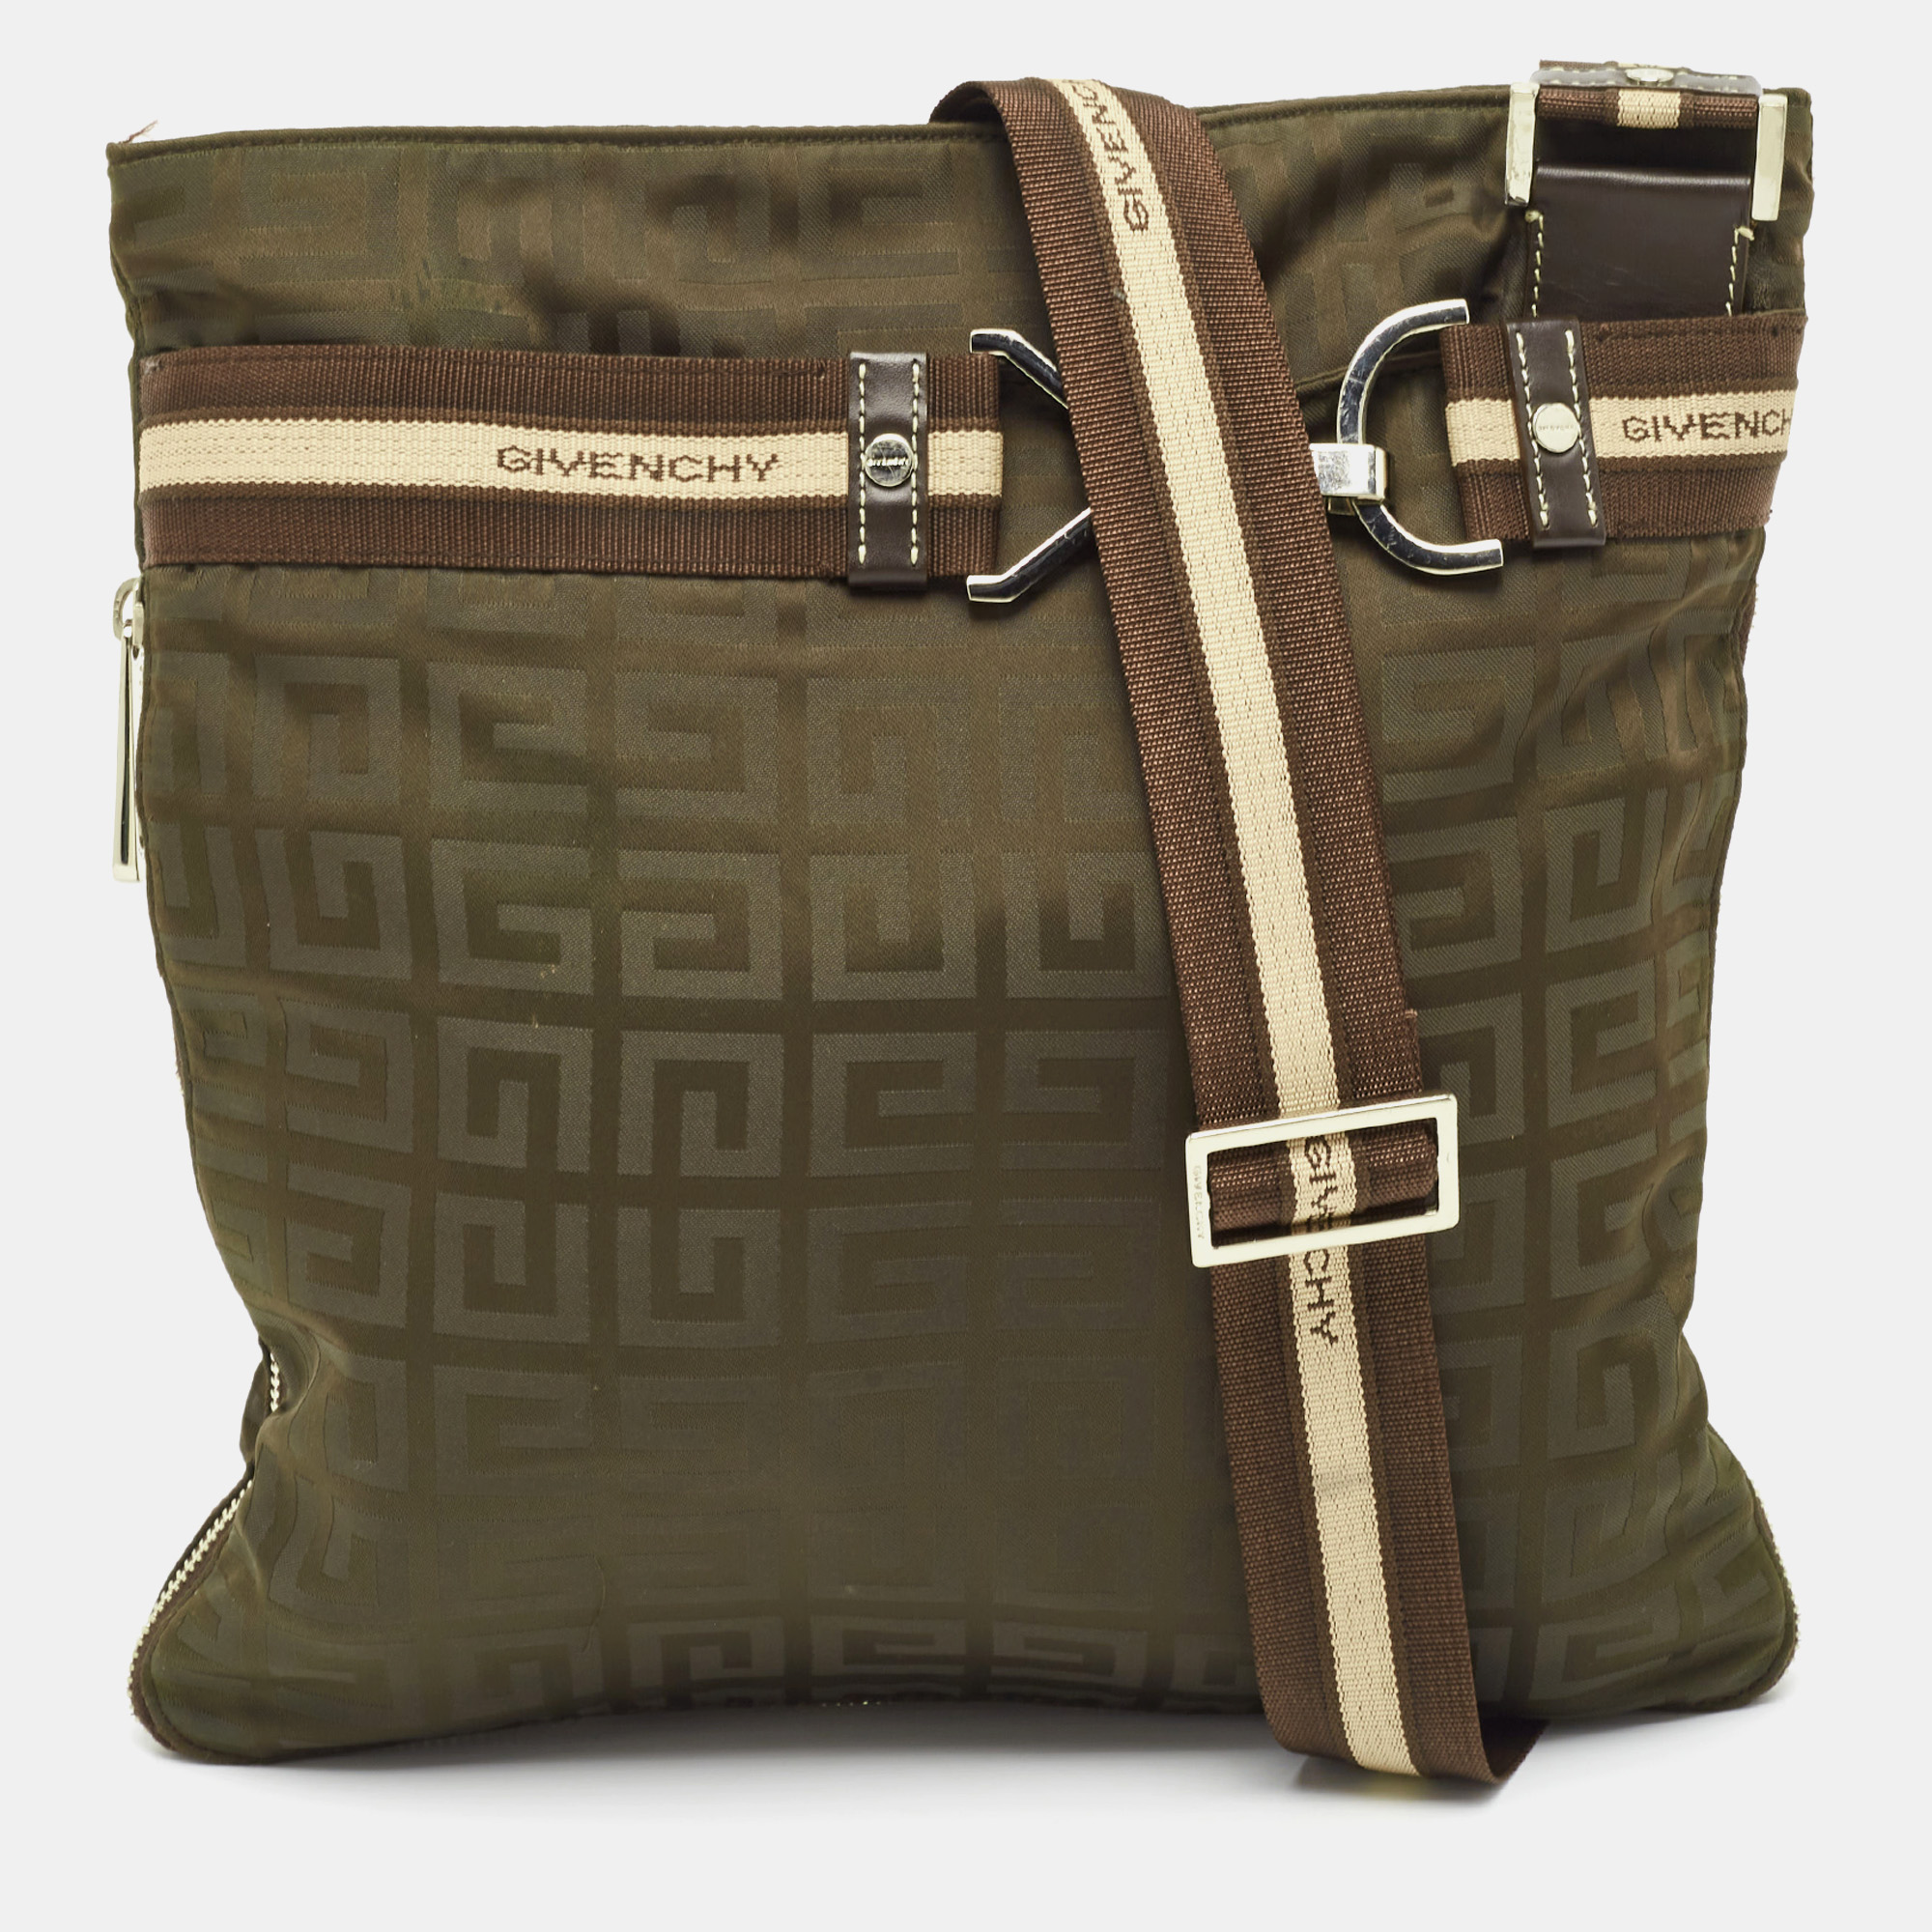 Givenchy Brown/Olive Green Signature Nylon Zip Around Messenger Bag